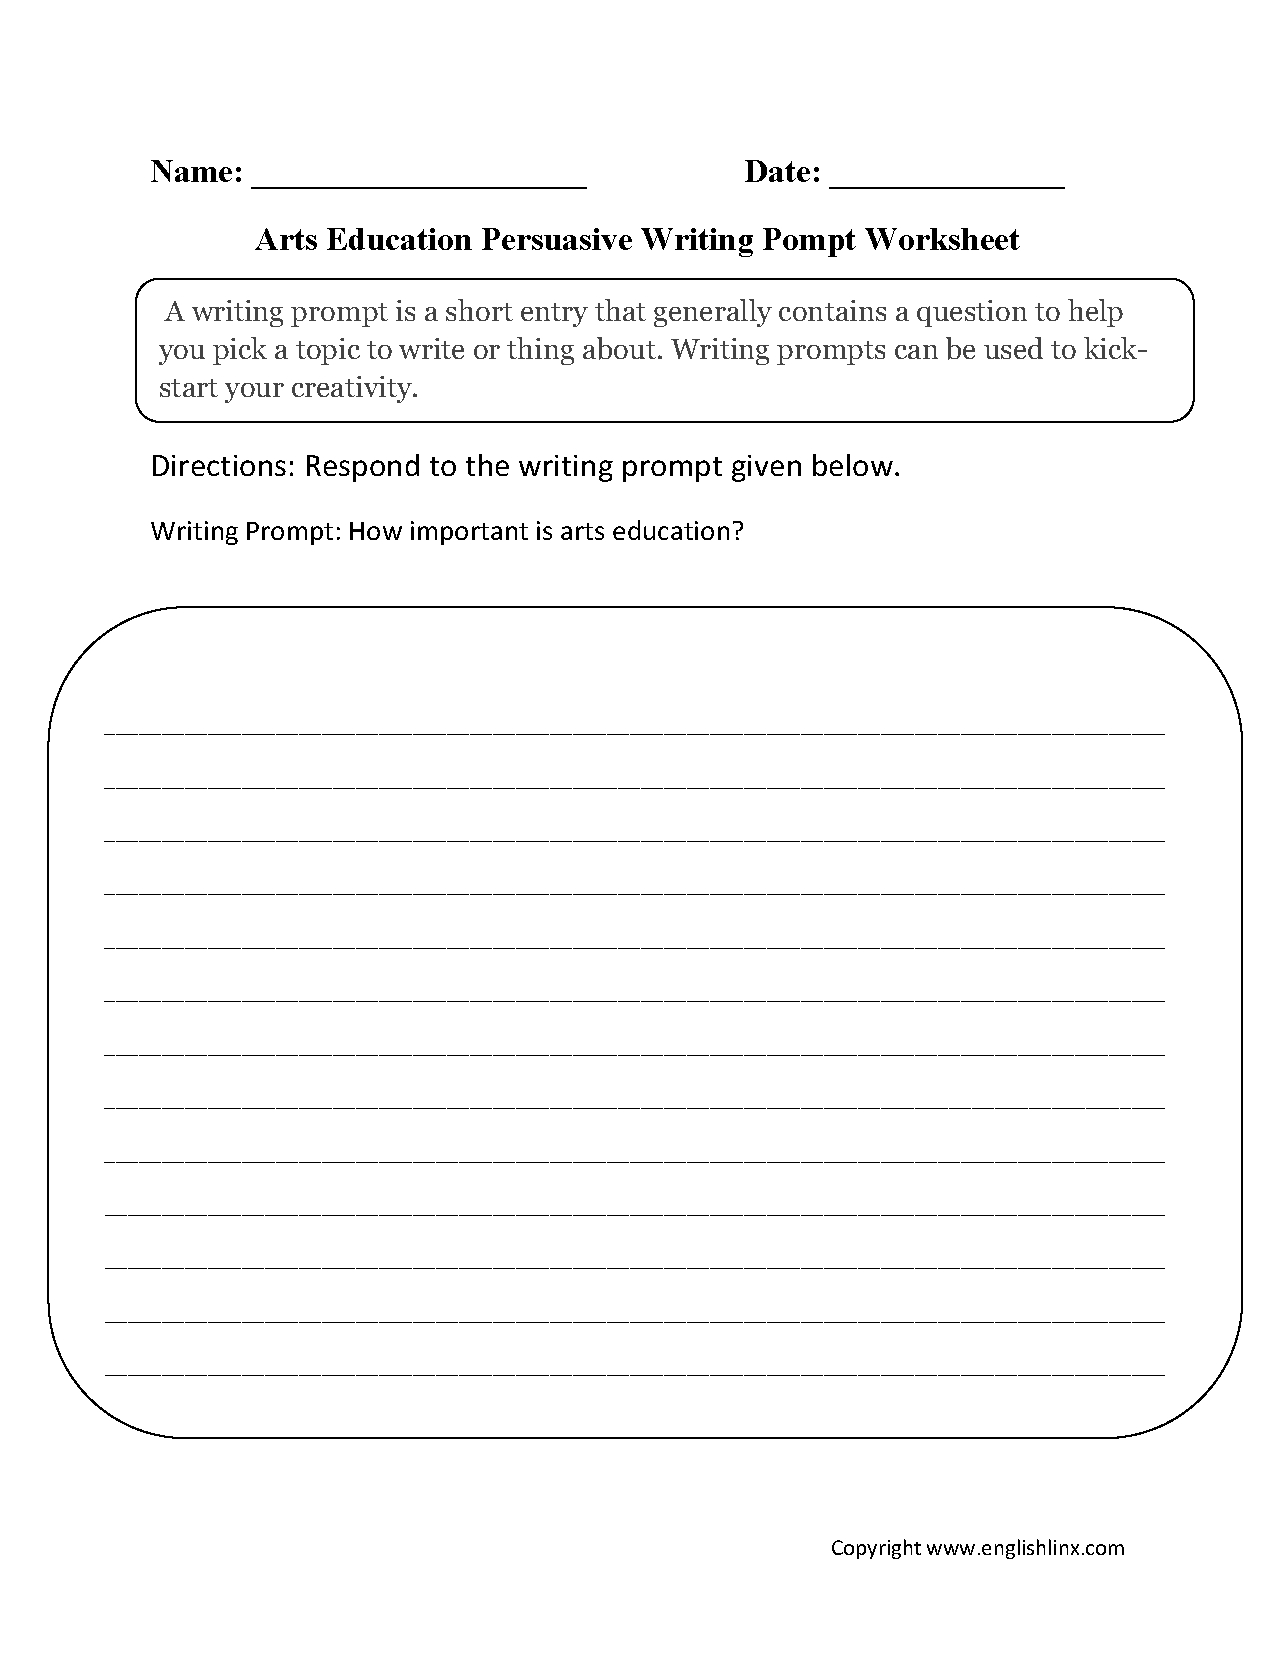 Writing Prompt Worksheets — db-excel.com